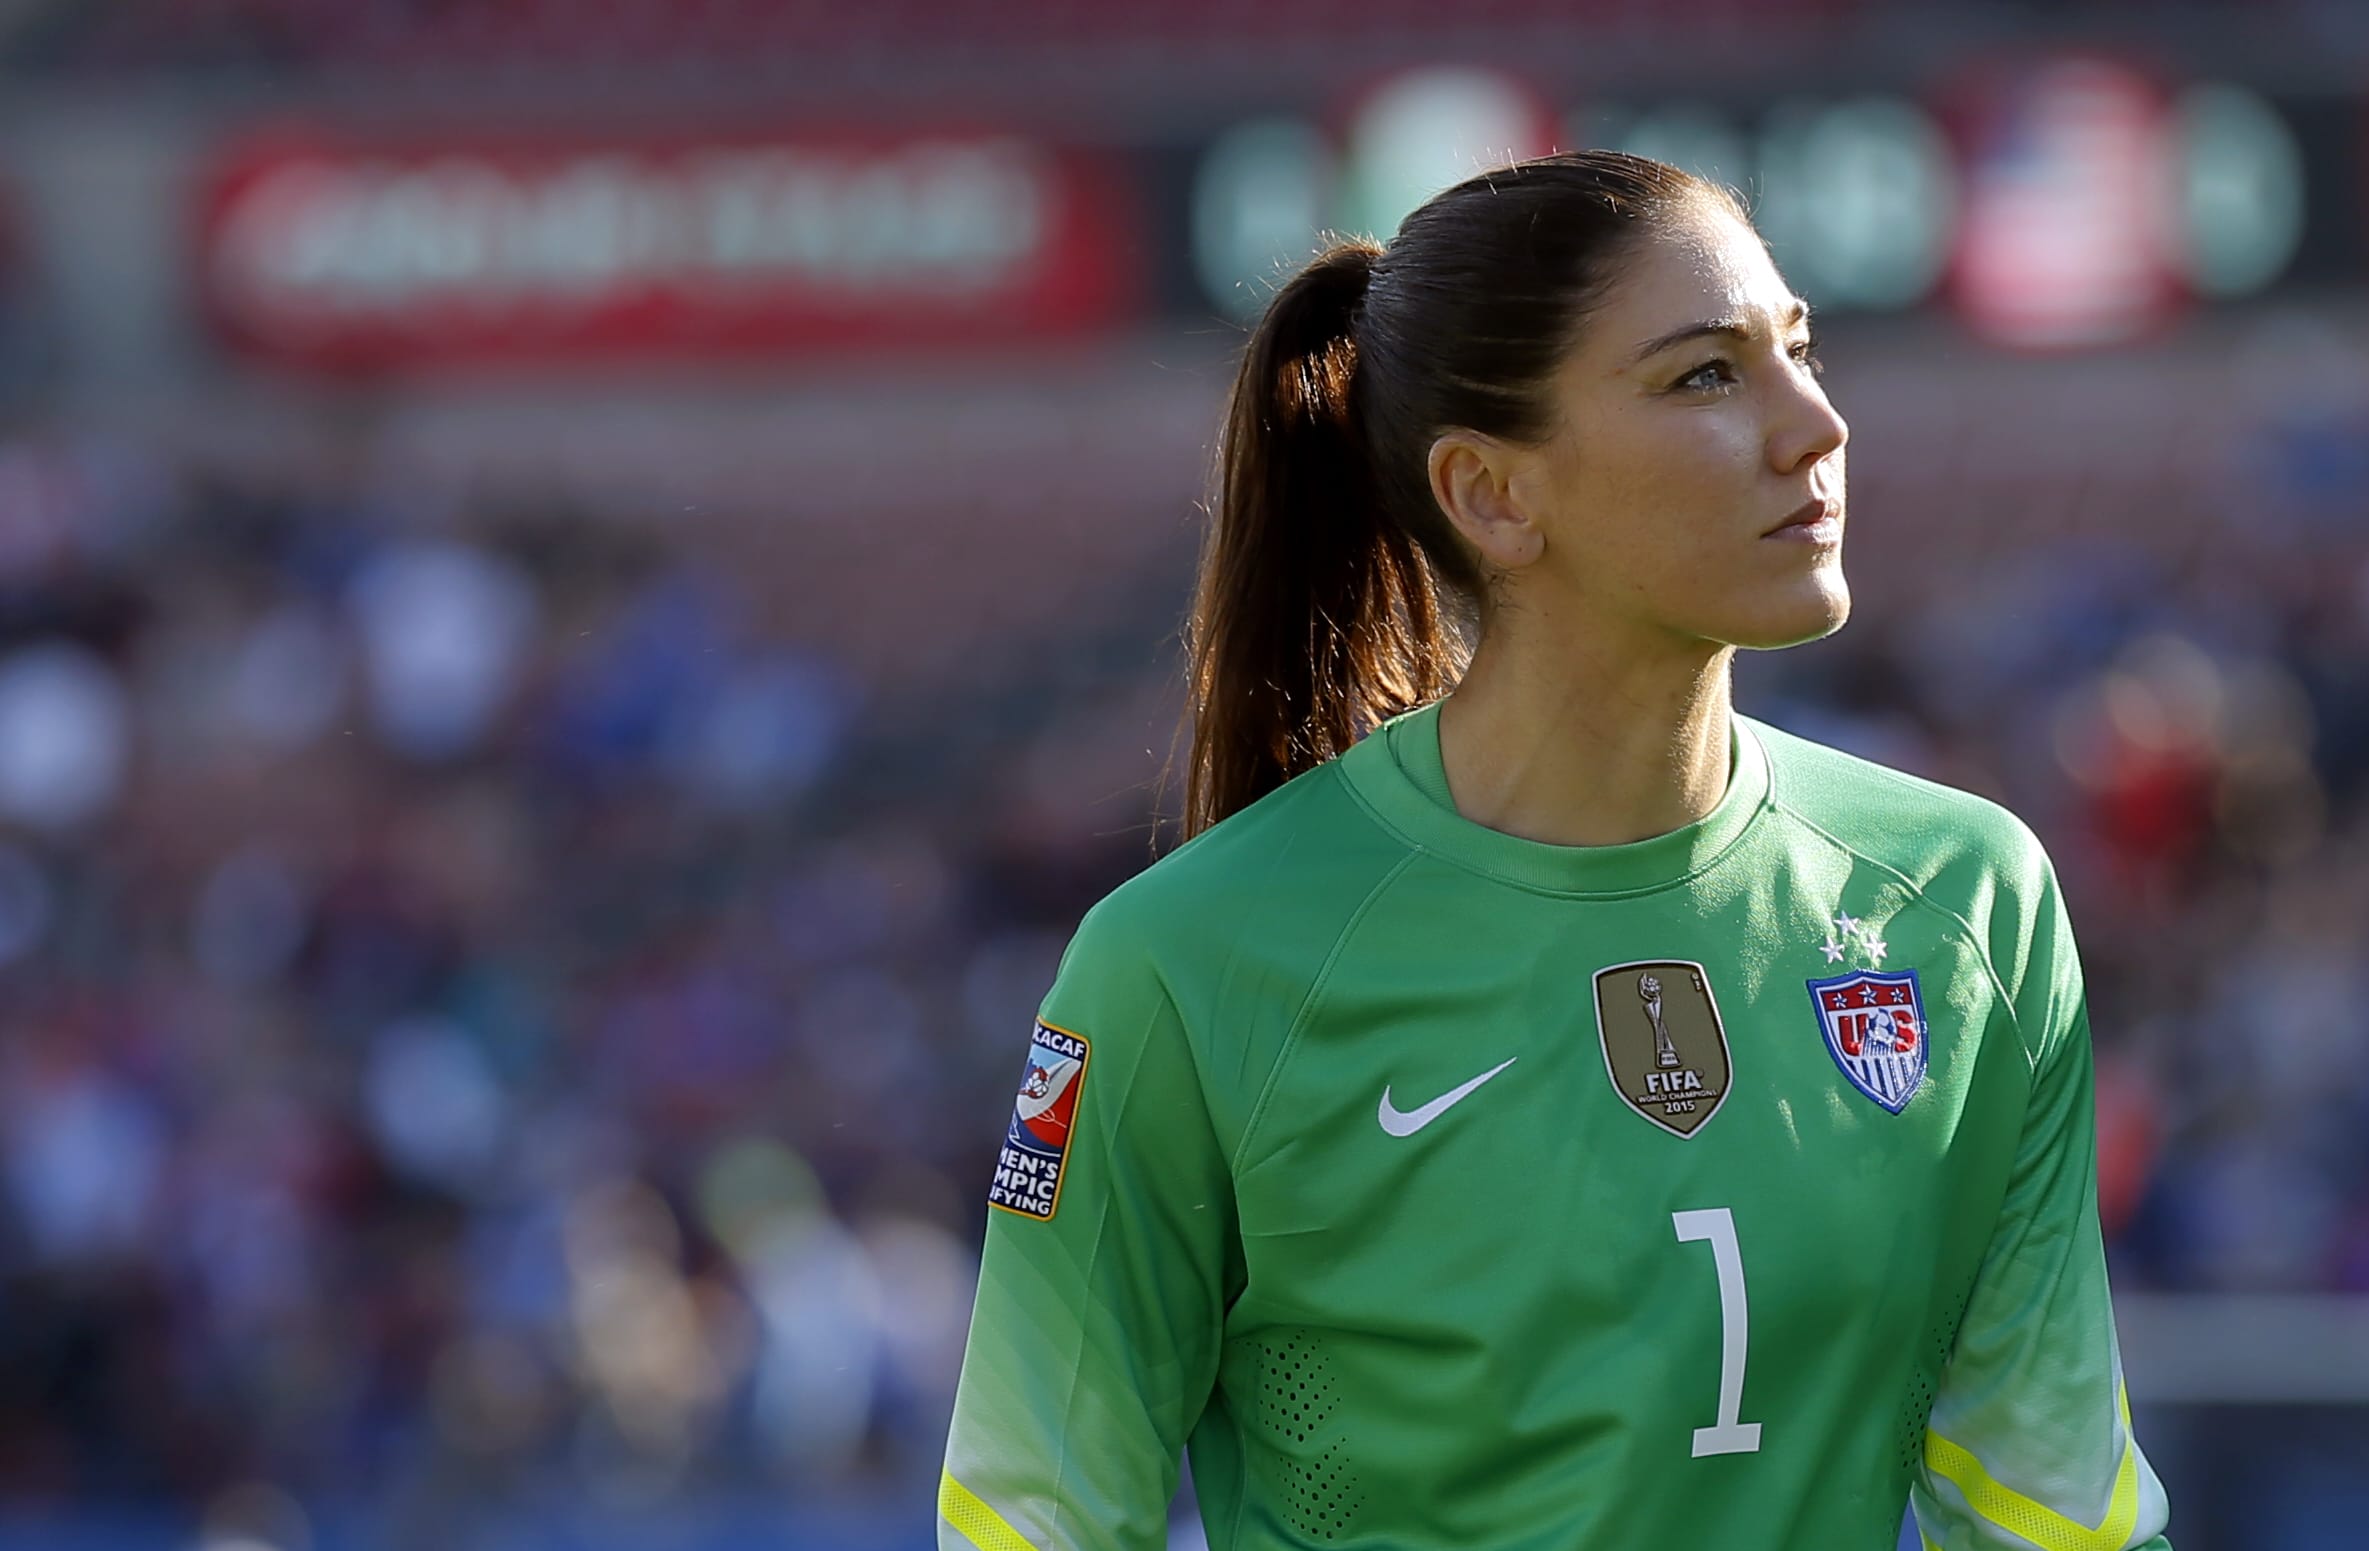 Hope Solo has taken an indefinite leave from the Seattle Reign of the National Women's Soccer League, less than a week after being suspended for six months by the U.S. national team for disparaging remarks about Sweden, the Reign announced Saturday, Aug. 27, 2016.